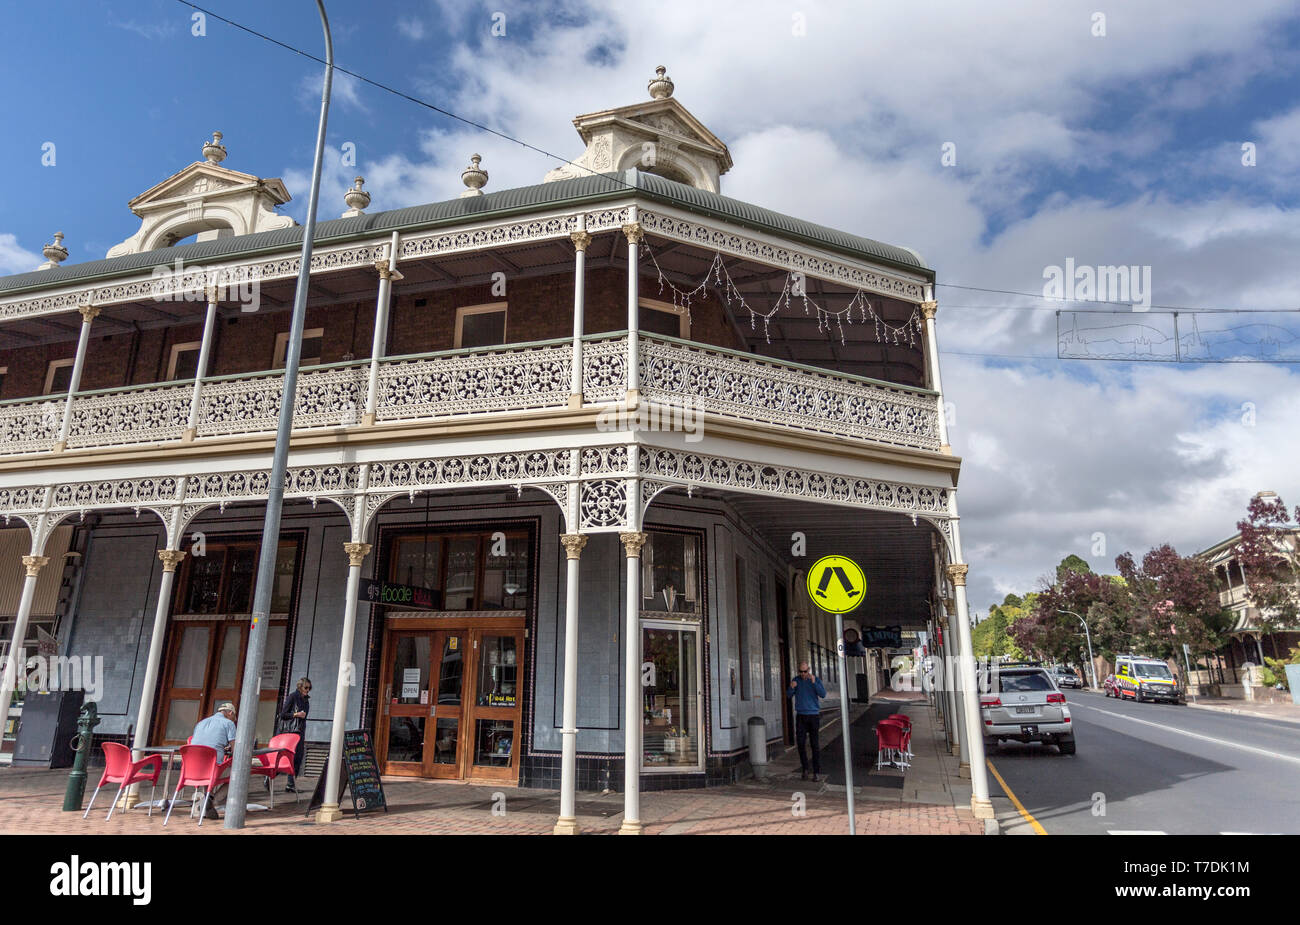 Facade of the heritage listed Imperial Hotel built in 1889 and ornamented with cast-iron friezework, bullnose awnings and parapets with Grecian urns a Stock Photo